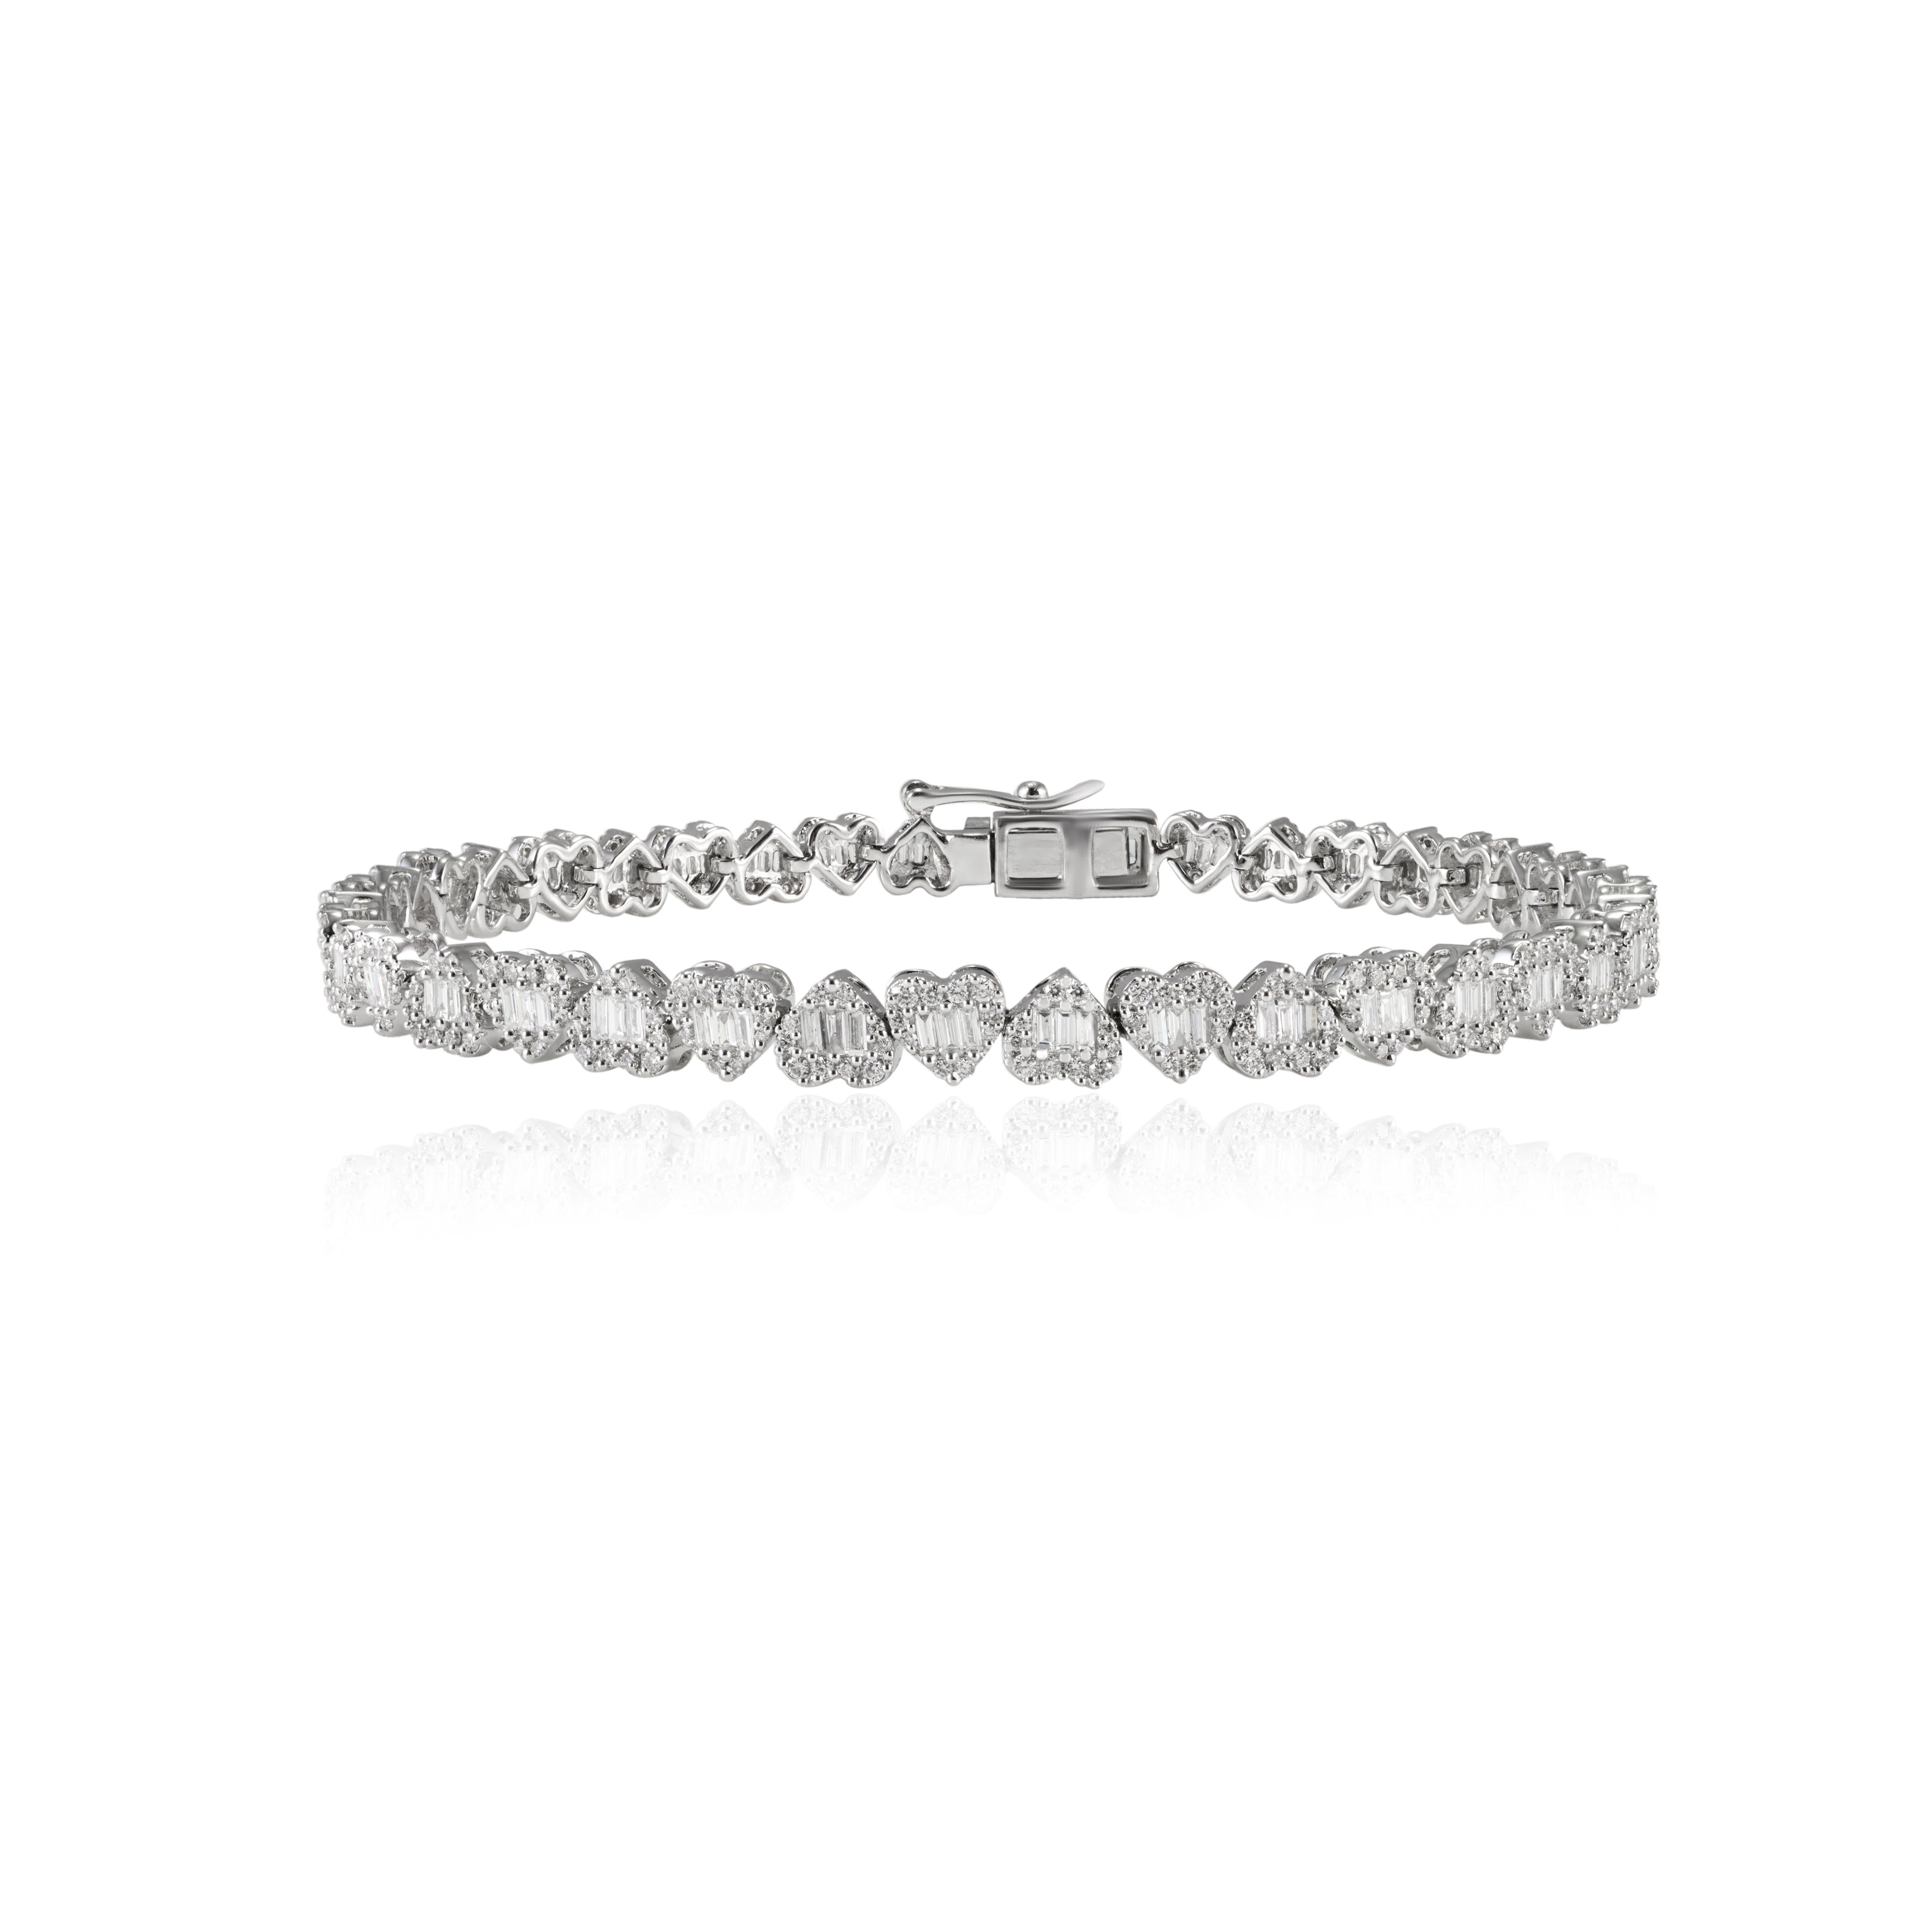 This Timeless Natural 2.11ct Diamond Heart Tennis Bracelet in 18K gold showcases sparkling natural diamonds, weighing 2.11 carats. 
April birthstone diamond brings love, fame, success and prosperity.
Designed with cluster of diamonds making heart,